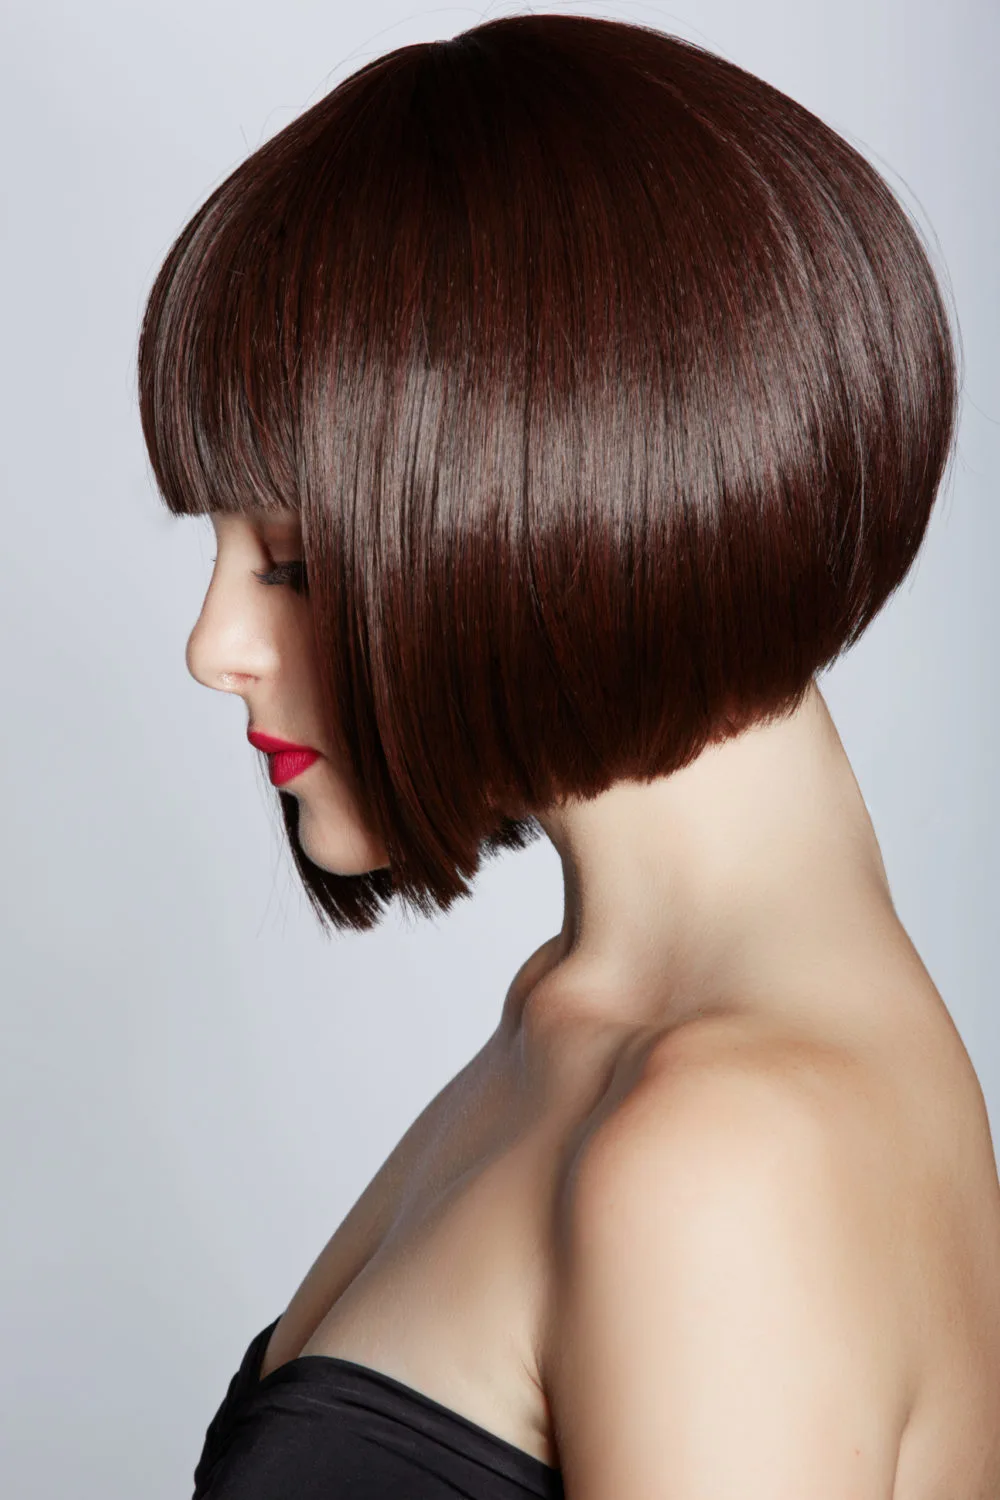 Inverted Tapered Bob, a tapered hairstyle for women